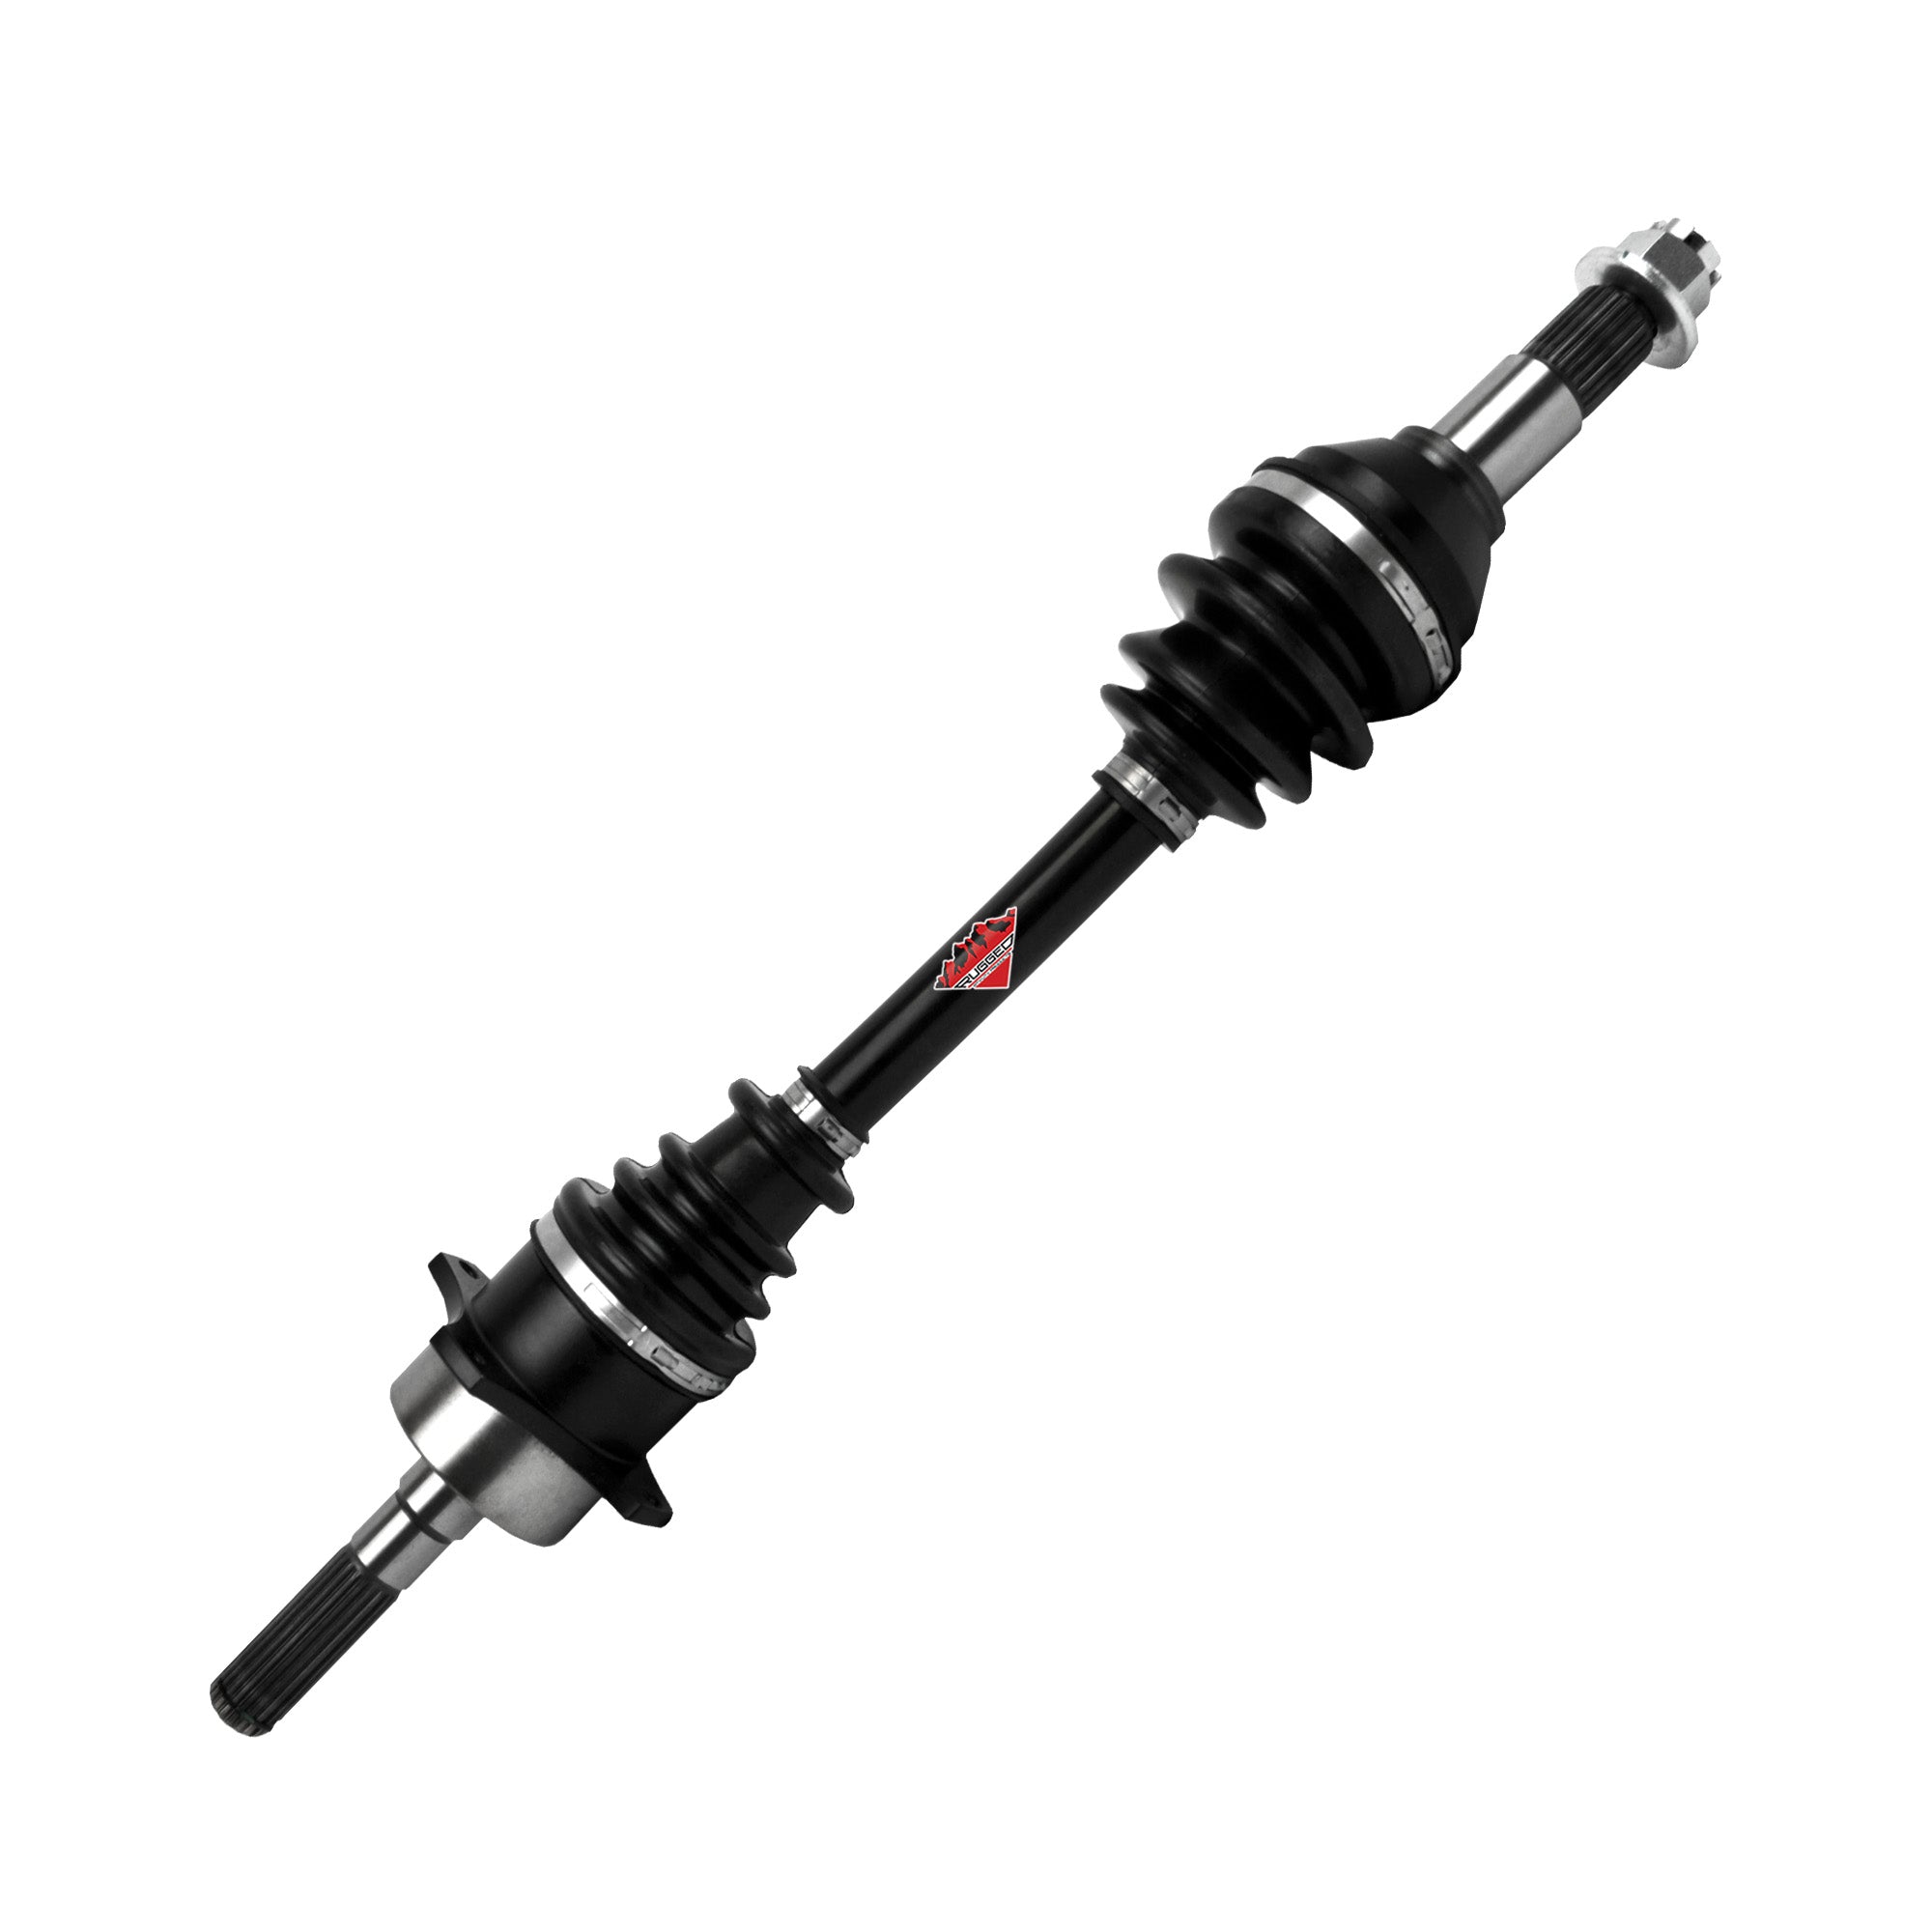 Performance Axle for Can Am Outlander 800 Max 